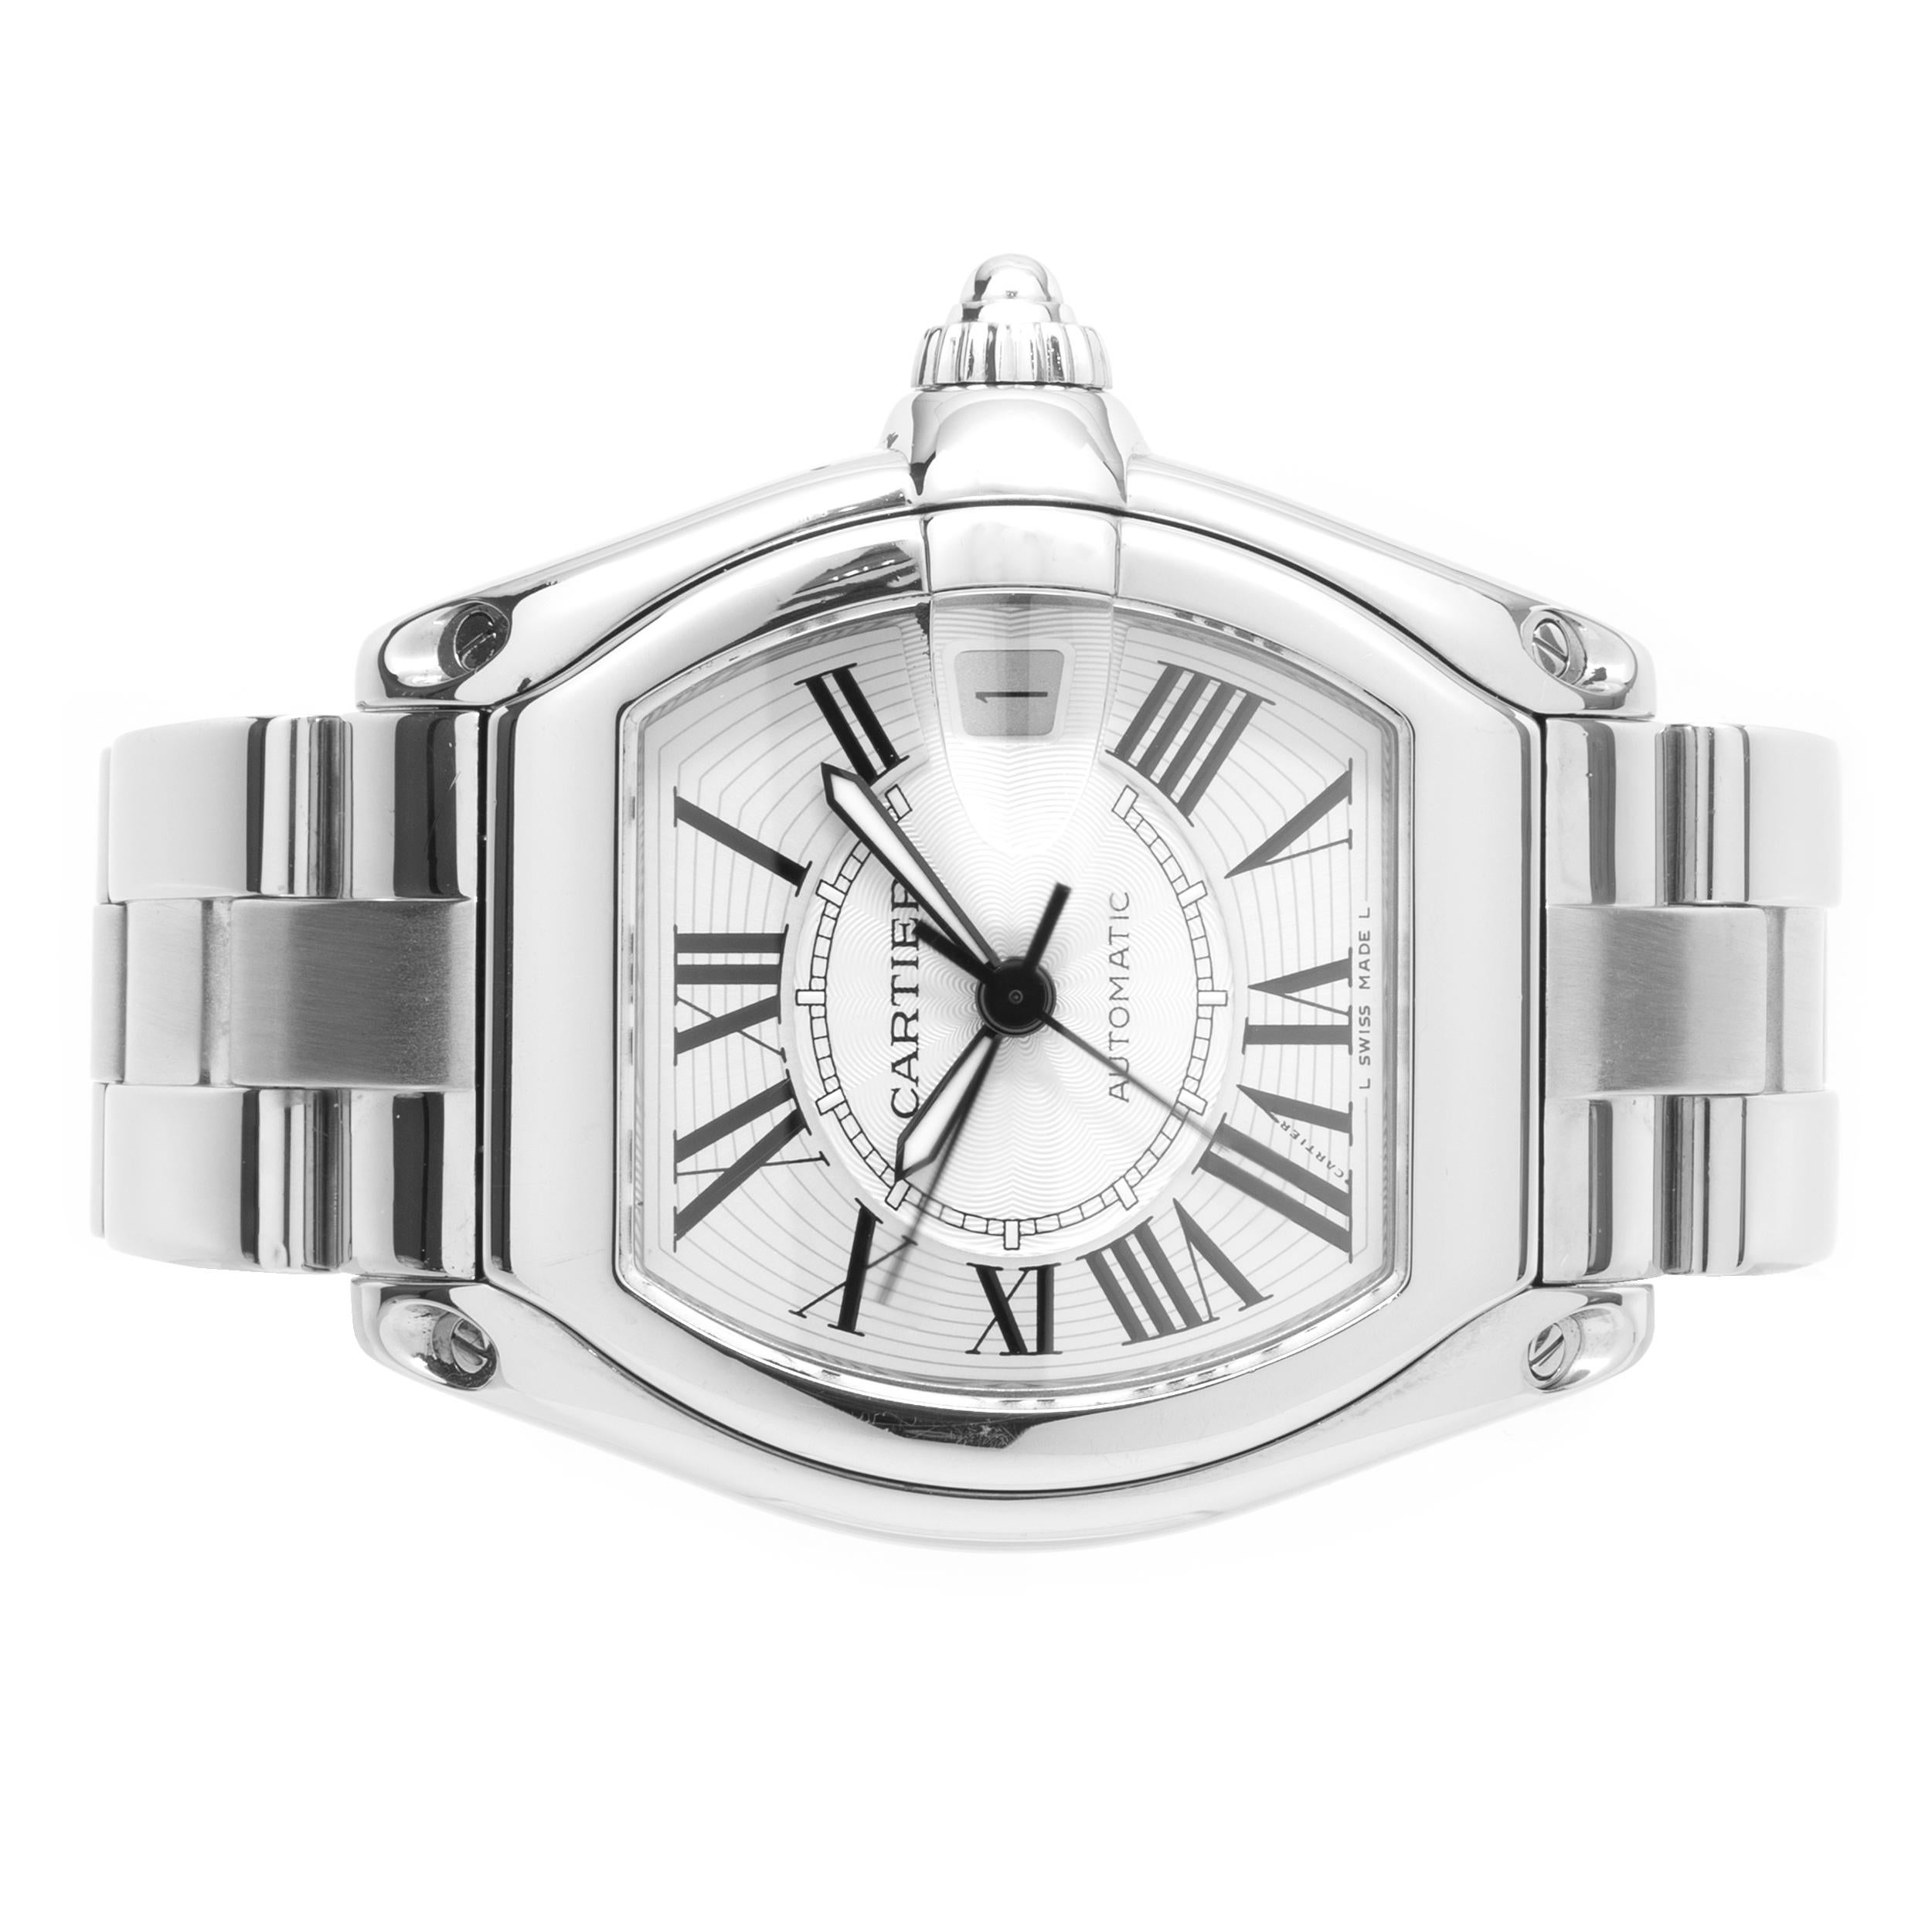 Movement: automatic
Function: hours, minutes, seconds, date
Case: 38mm oval case, push-pull crown, sapphire crystal, smooth bezel
Dial: silver dial, steel sword sweeping hands
Band: Cartier stainless steel roadster bracelet
Serial #: